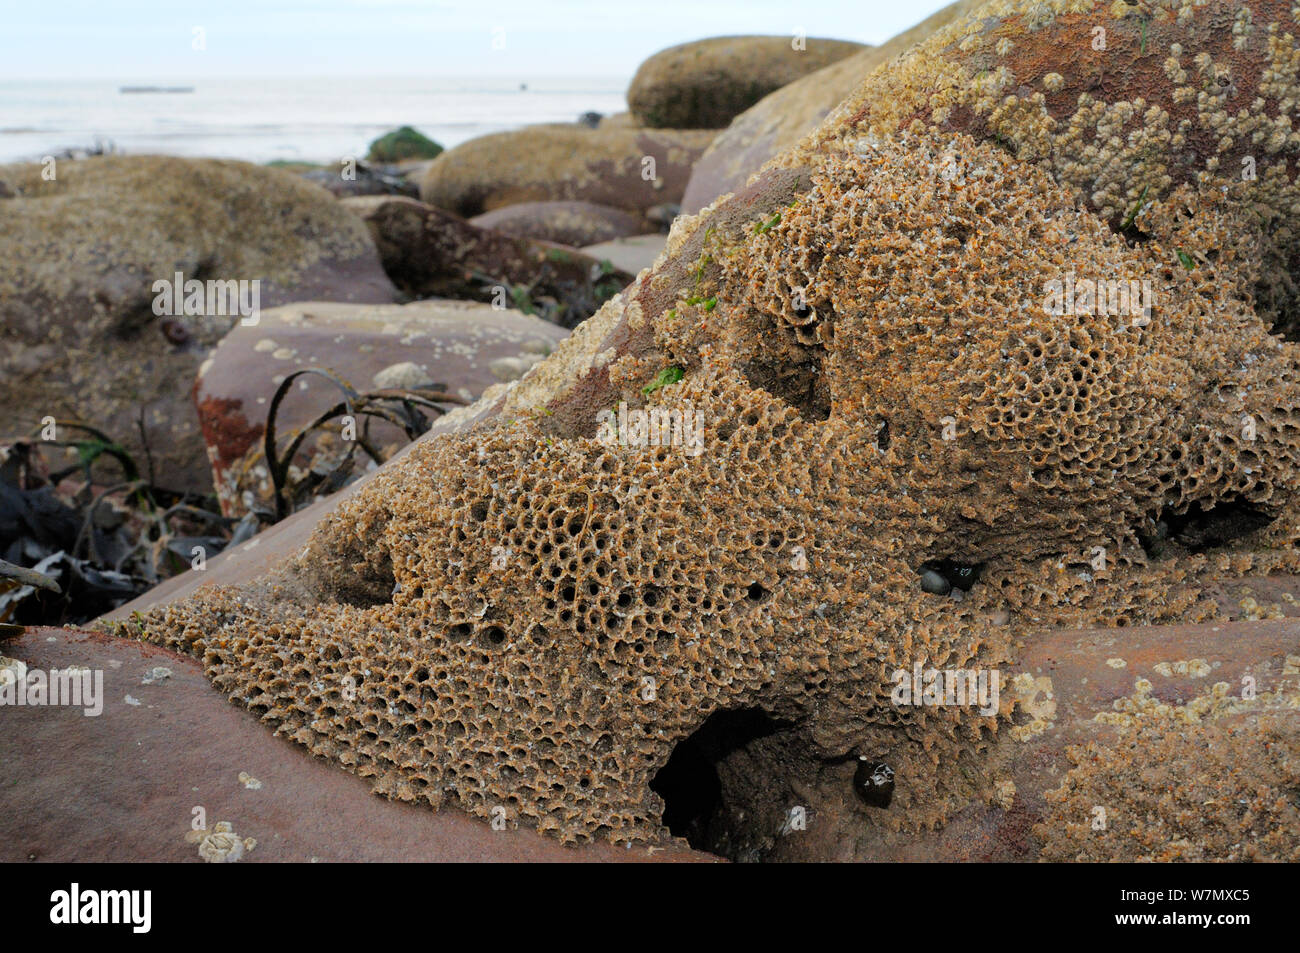 Honeycomb worm reef (Sabellaria alveolata) with clustered tubes built of sand grains attached to boulders, exposed at low tide with the sea in the background, St.Bees, Cumbria, UK, July. Stock Photo